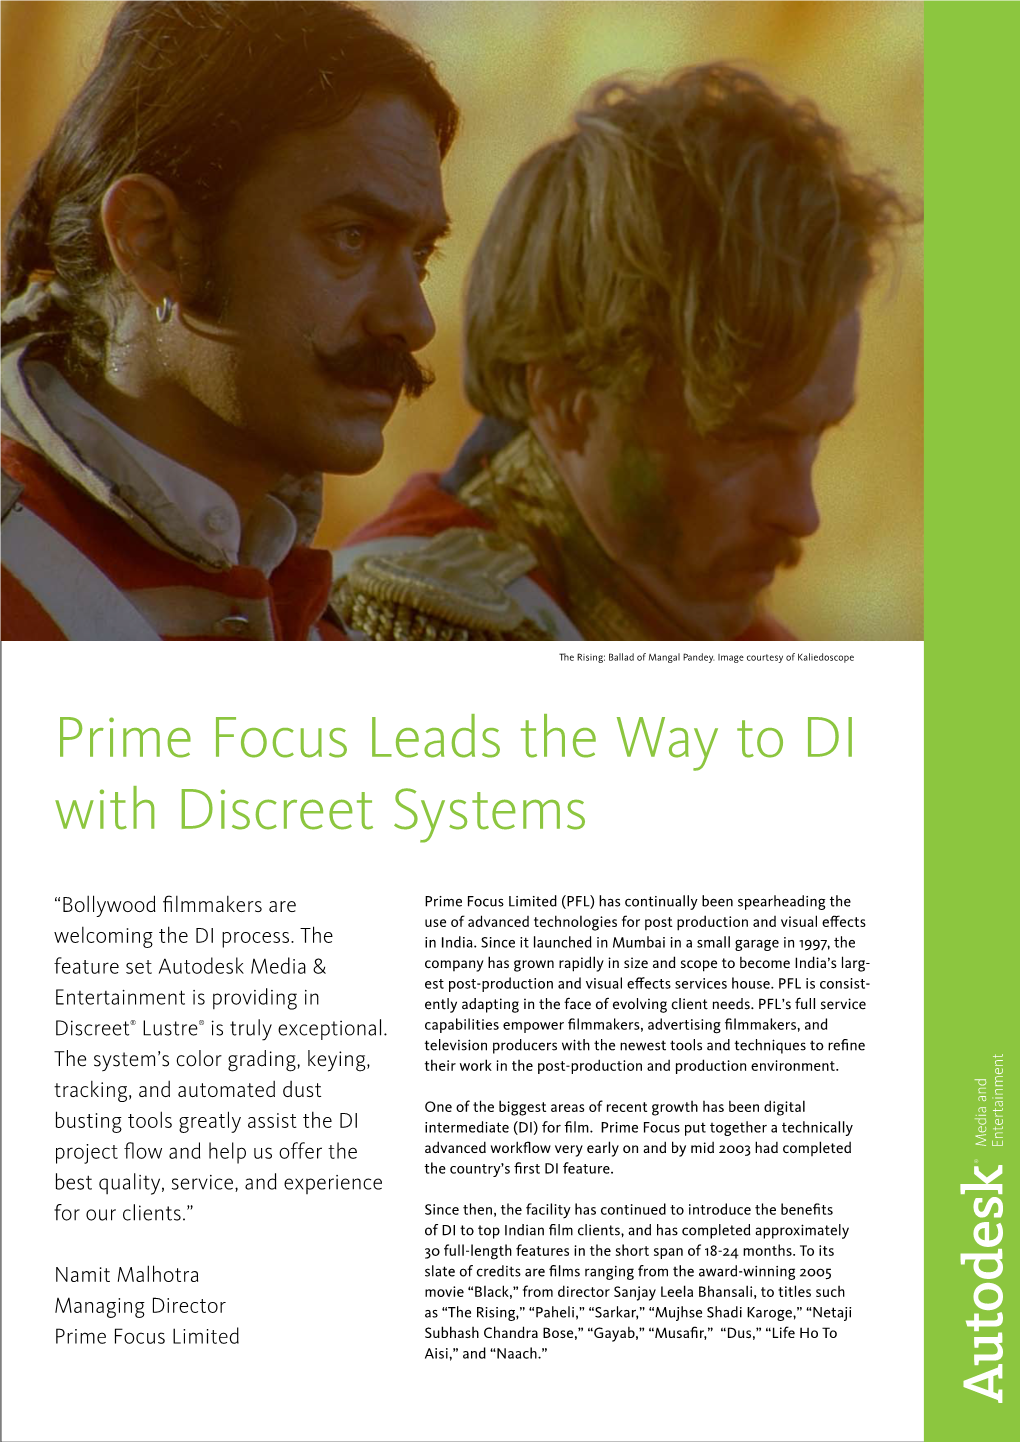 Prime Focus Leads the Way to DI with Discreet Systems